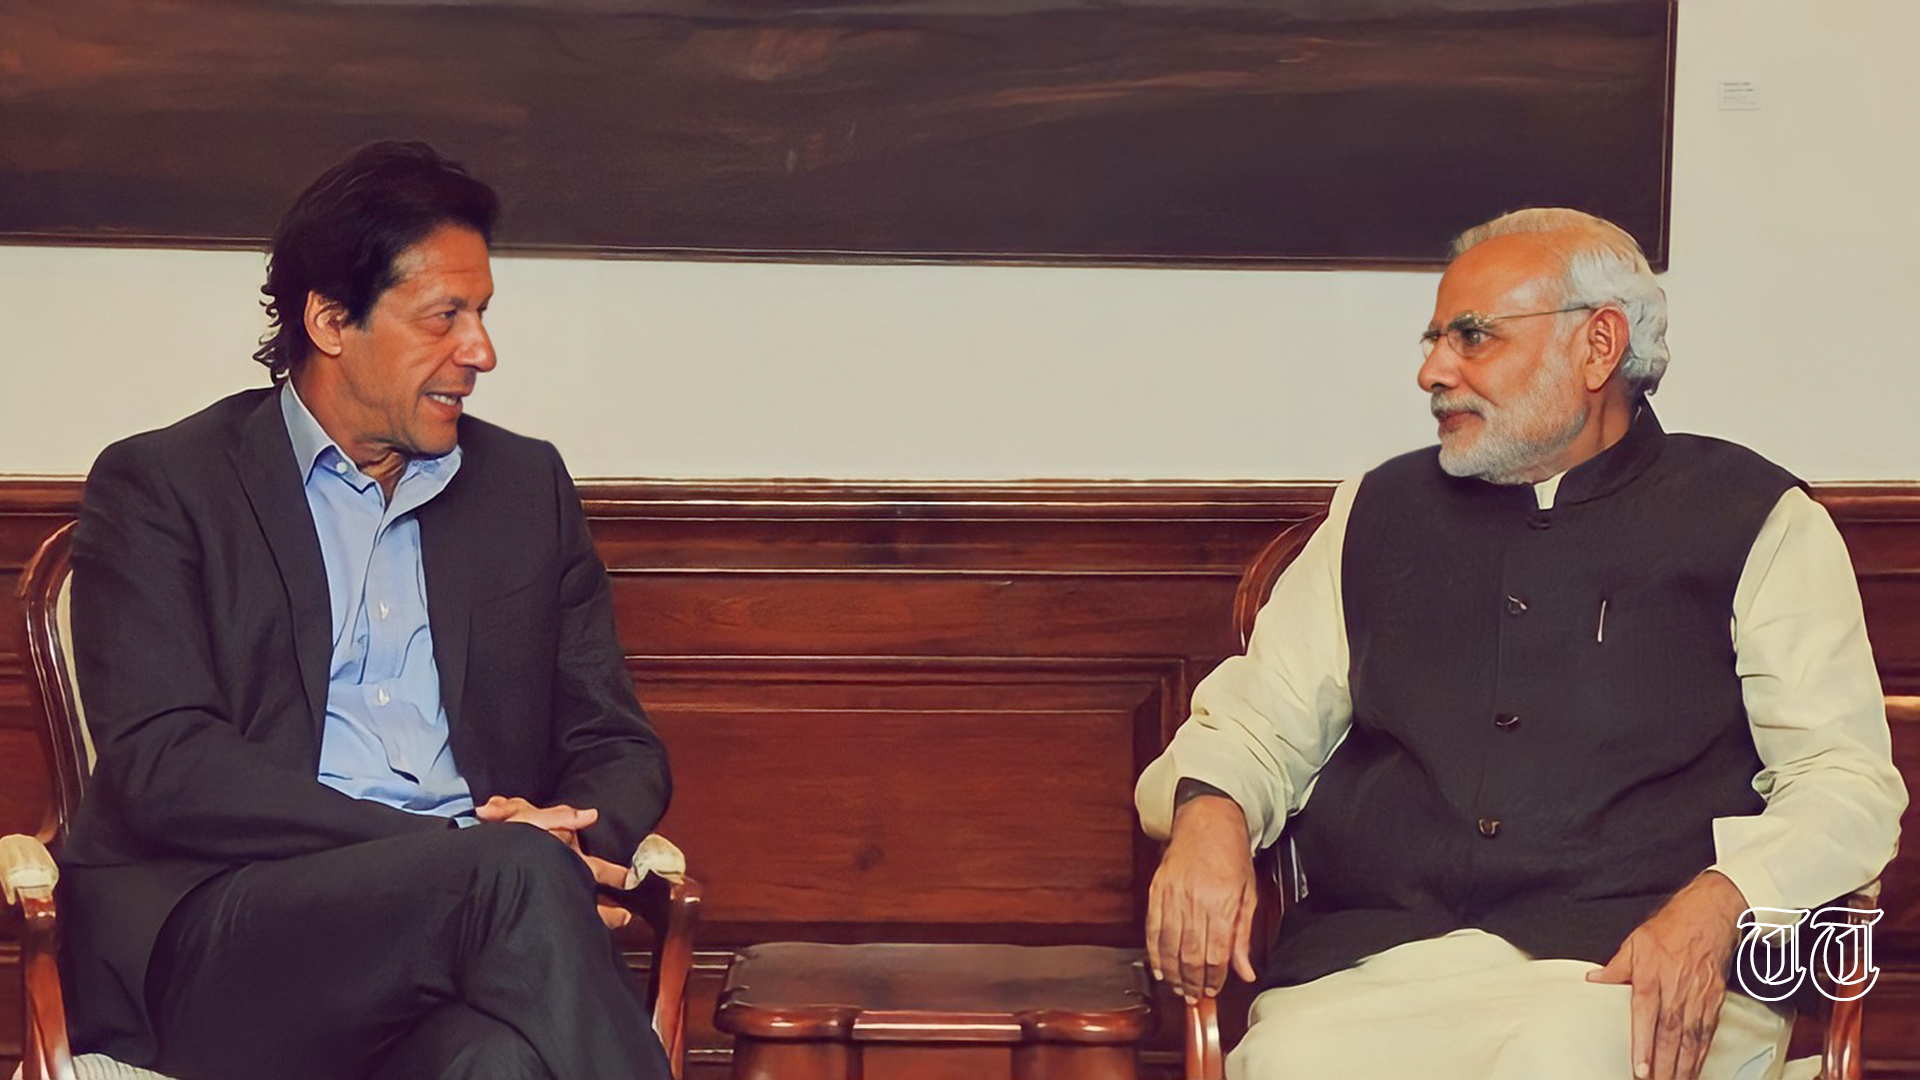 A file photo of PTI chief Imran Khan (L) and Indian prime minister Narendra Modi is shown.